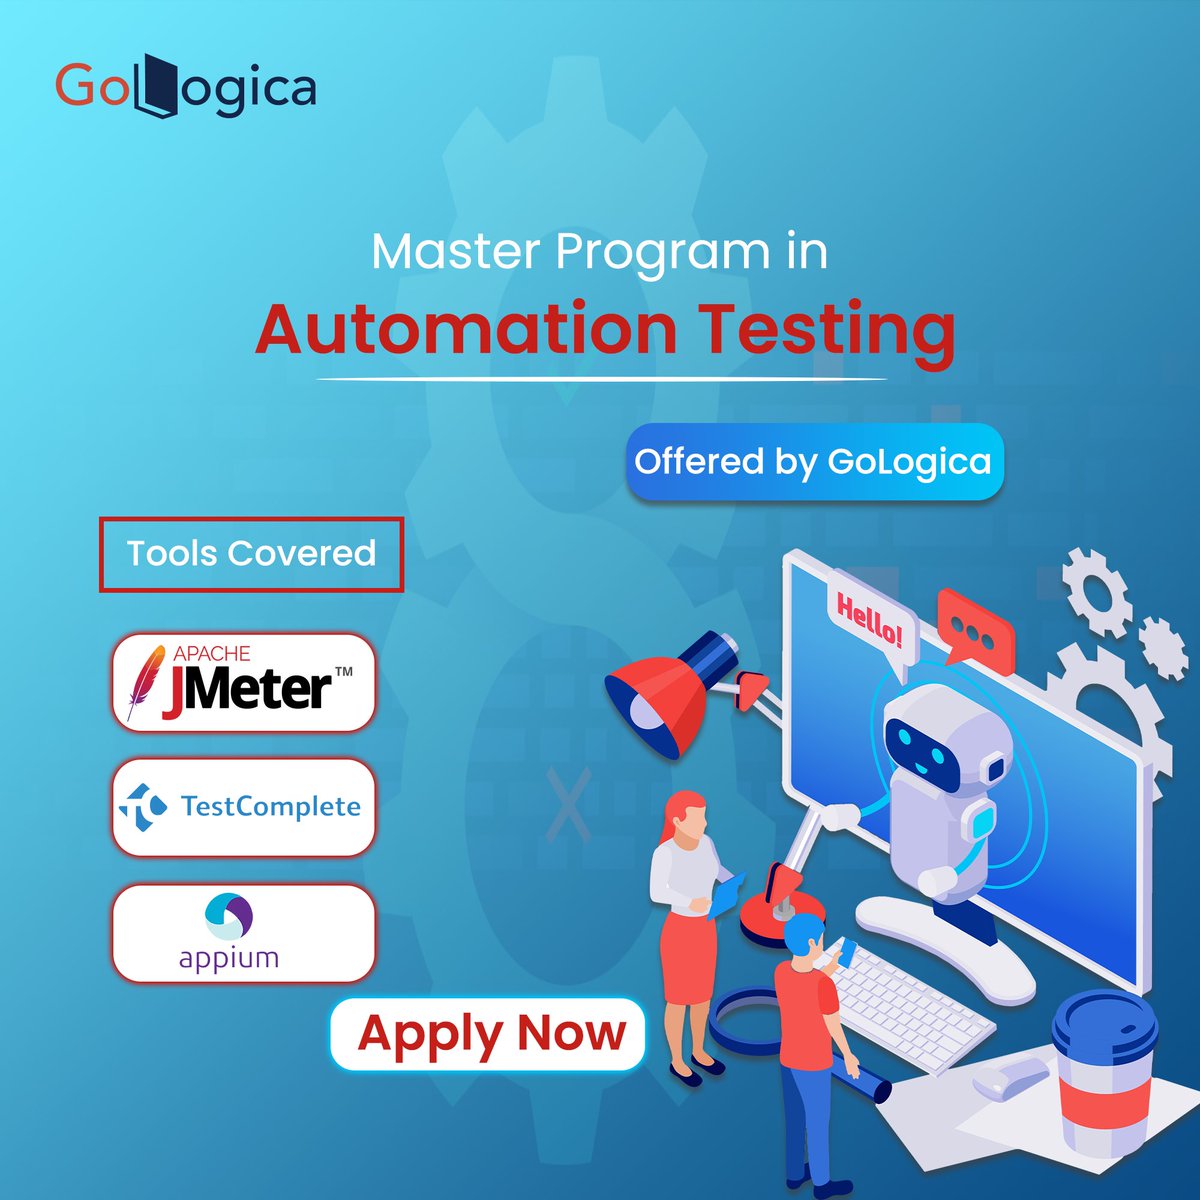 Level up your automation testing skills with GoLogica's Master Program!

For More Details: gologica.com/course/automat…

#Automationtesting #JMeter #TestComplete #SoftwareTesting #GoLogica #MasterProgram #ITCareers #student #course #ittraining #apache #testing #career #freedemo #cla